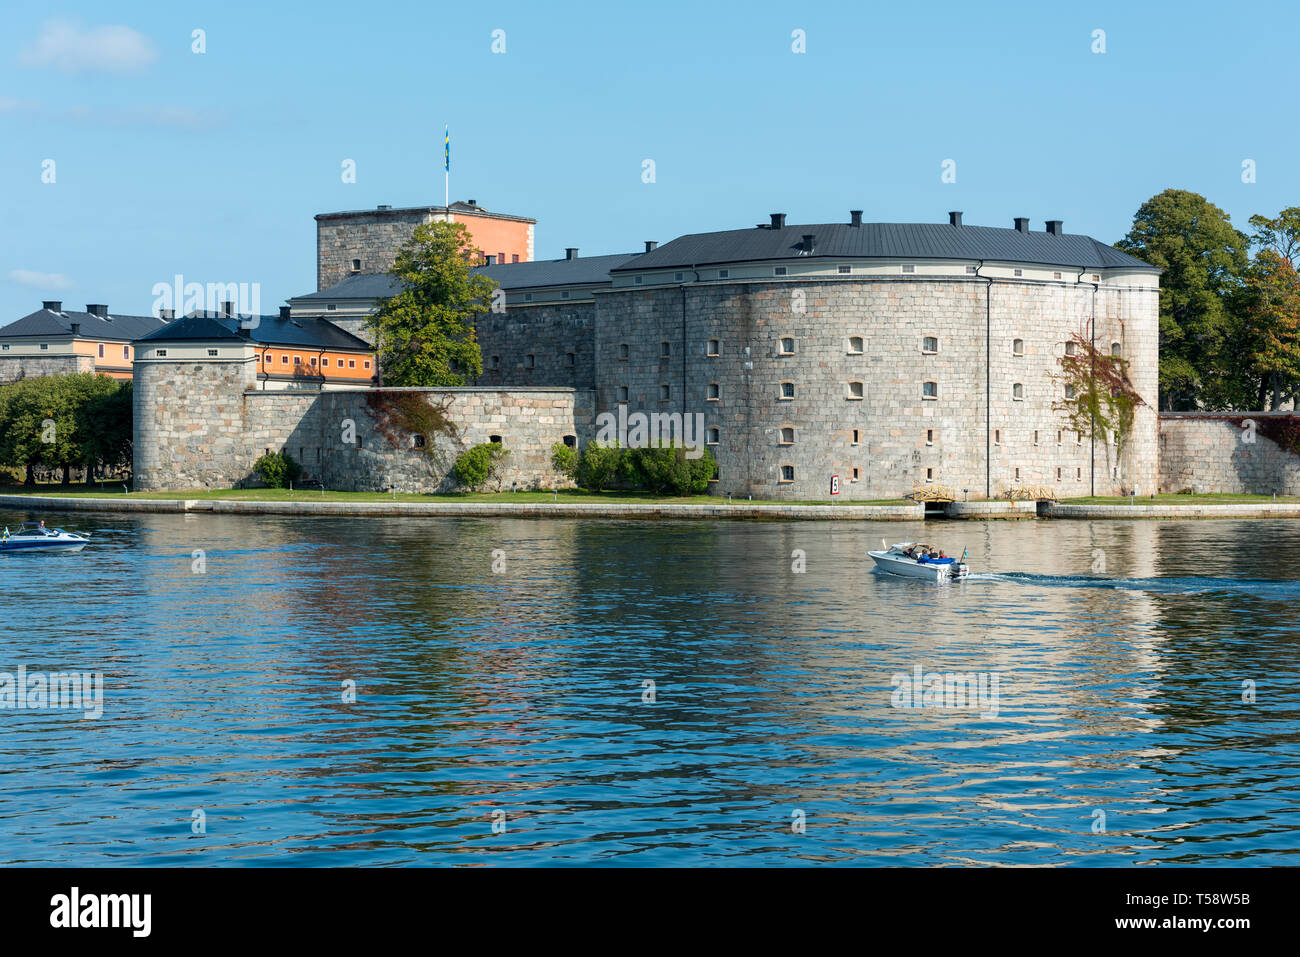 Vaxholm Castle, overlooking the entrance to Stegesund channel, was completed in 1863. The citadel's role as a fortress came to an end 9 years later. Stock Photo